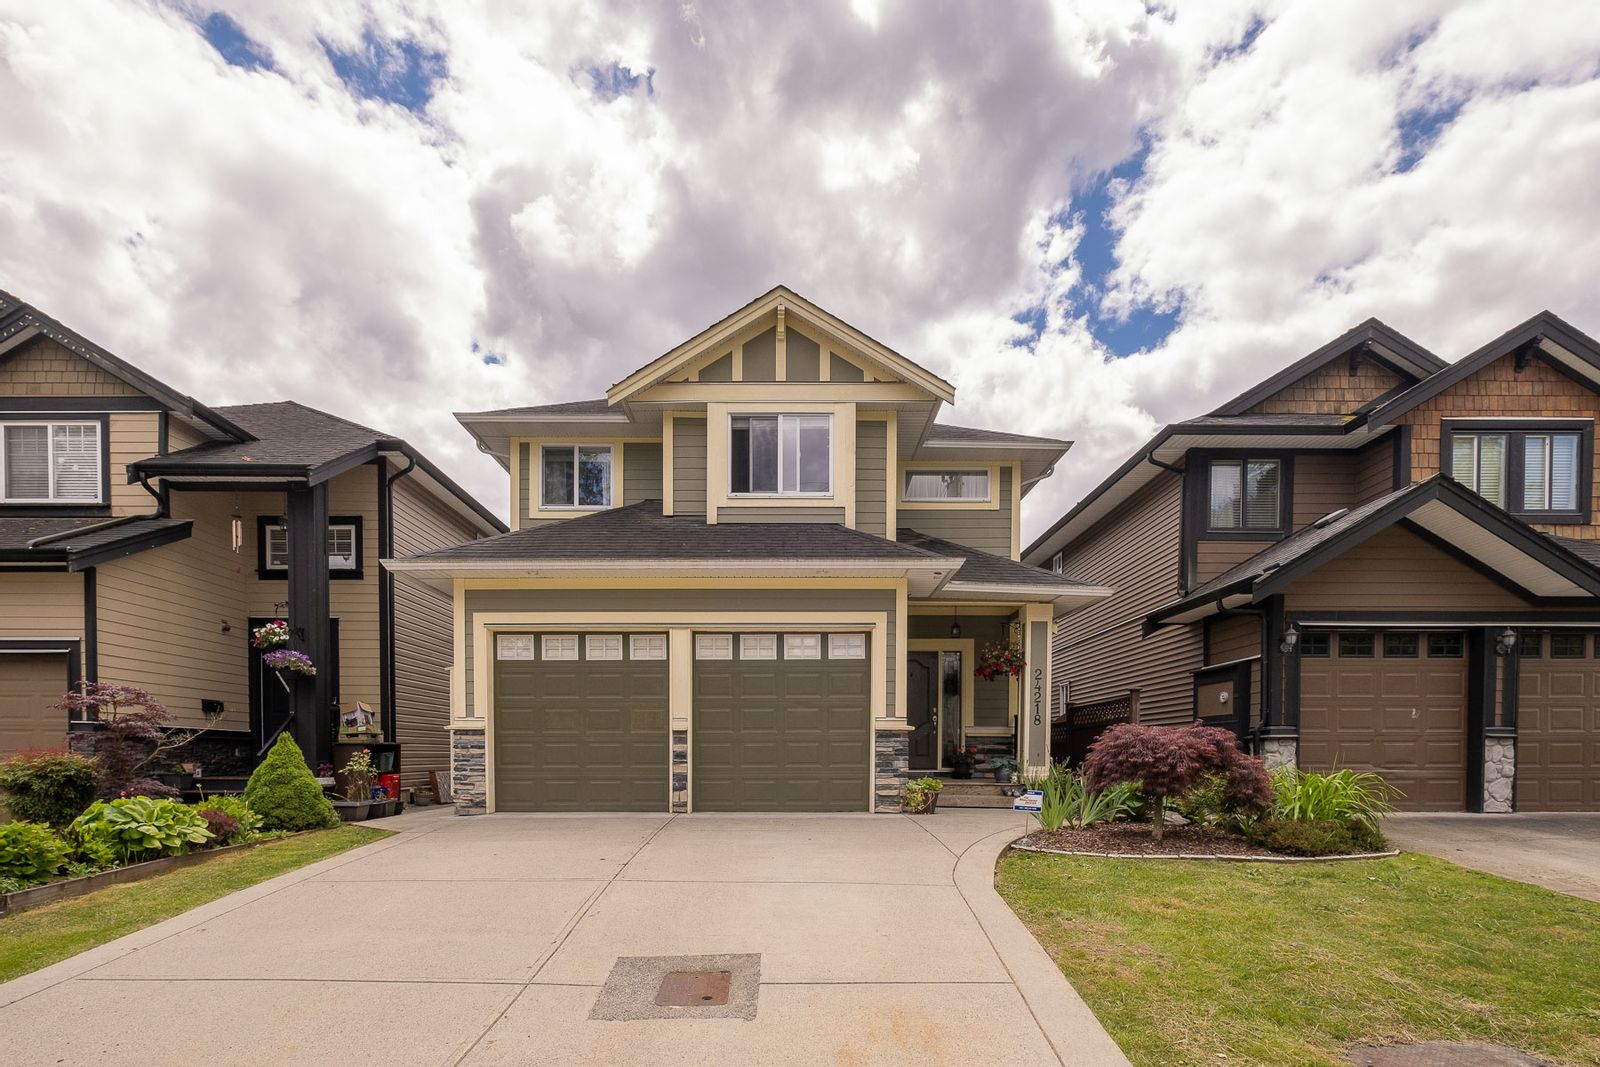 Just Sold: 24218 104 Ave., Maple Ridge, Albion